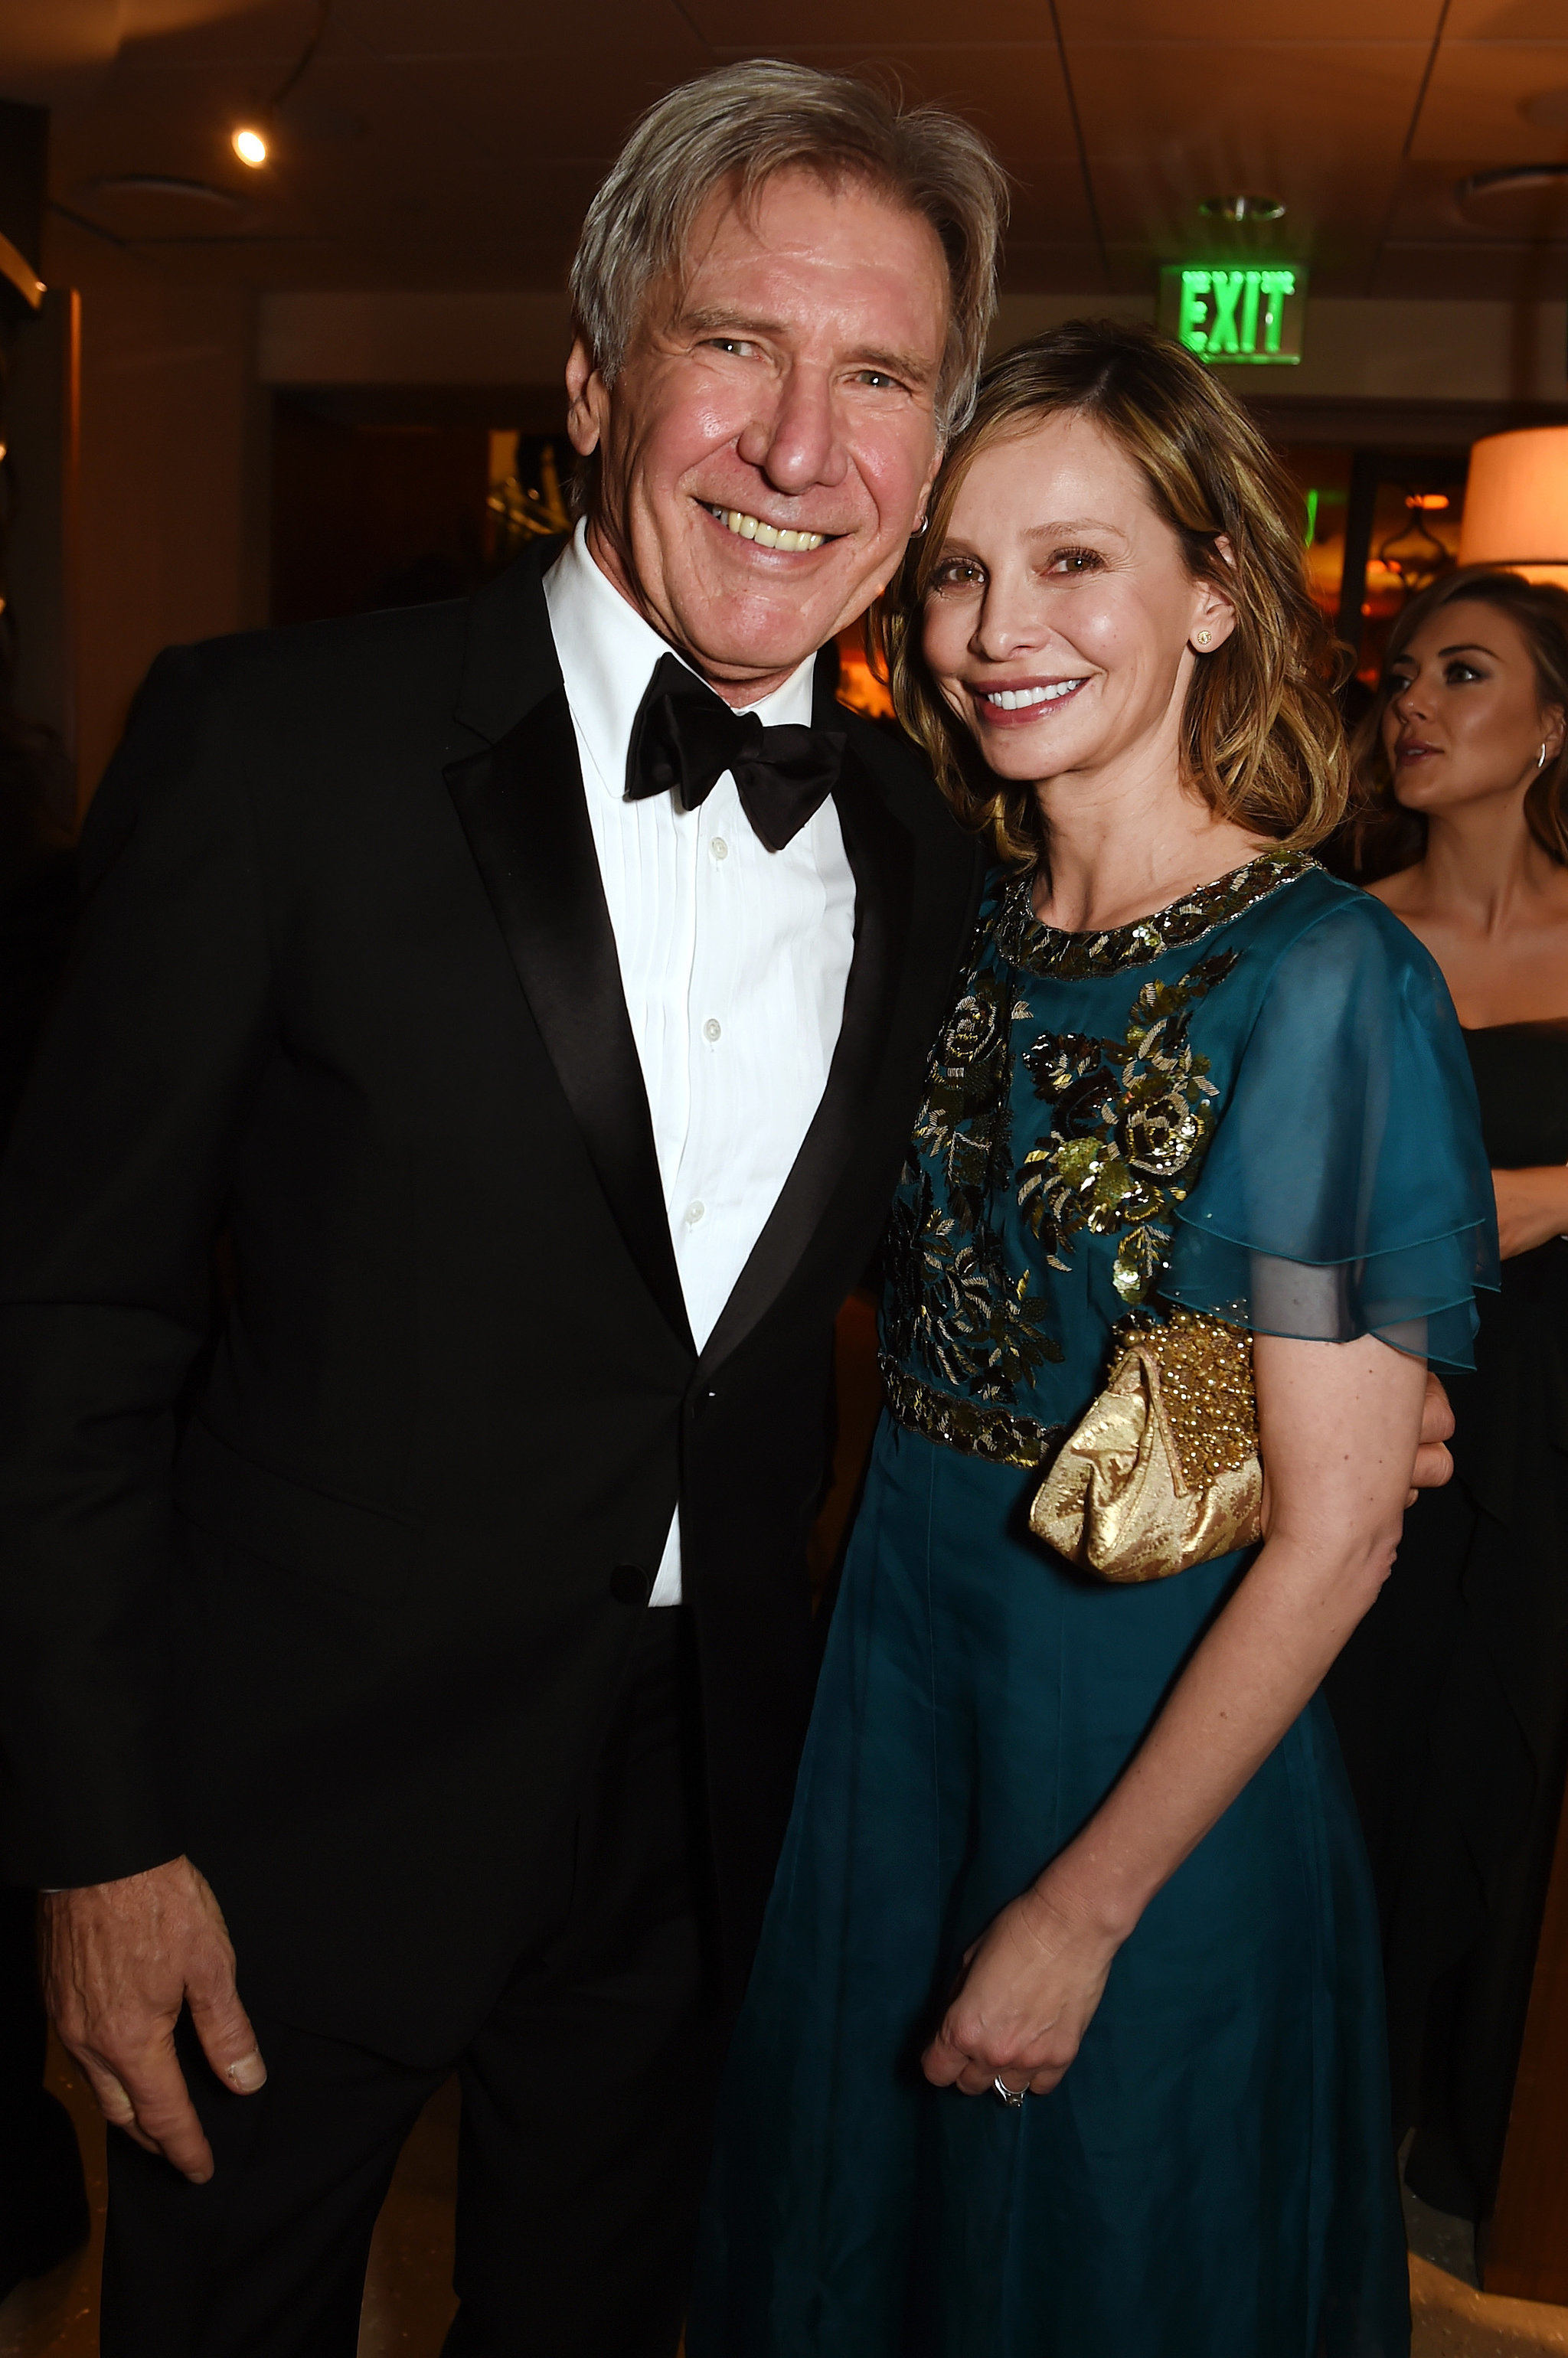 Pictured: Calista Flockhart and Harrison Ford | Go Inside the Hottest